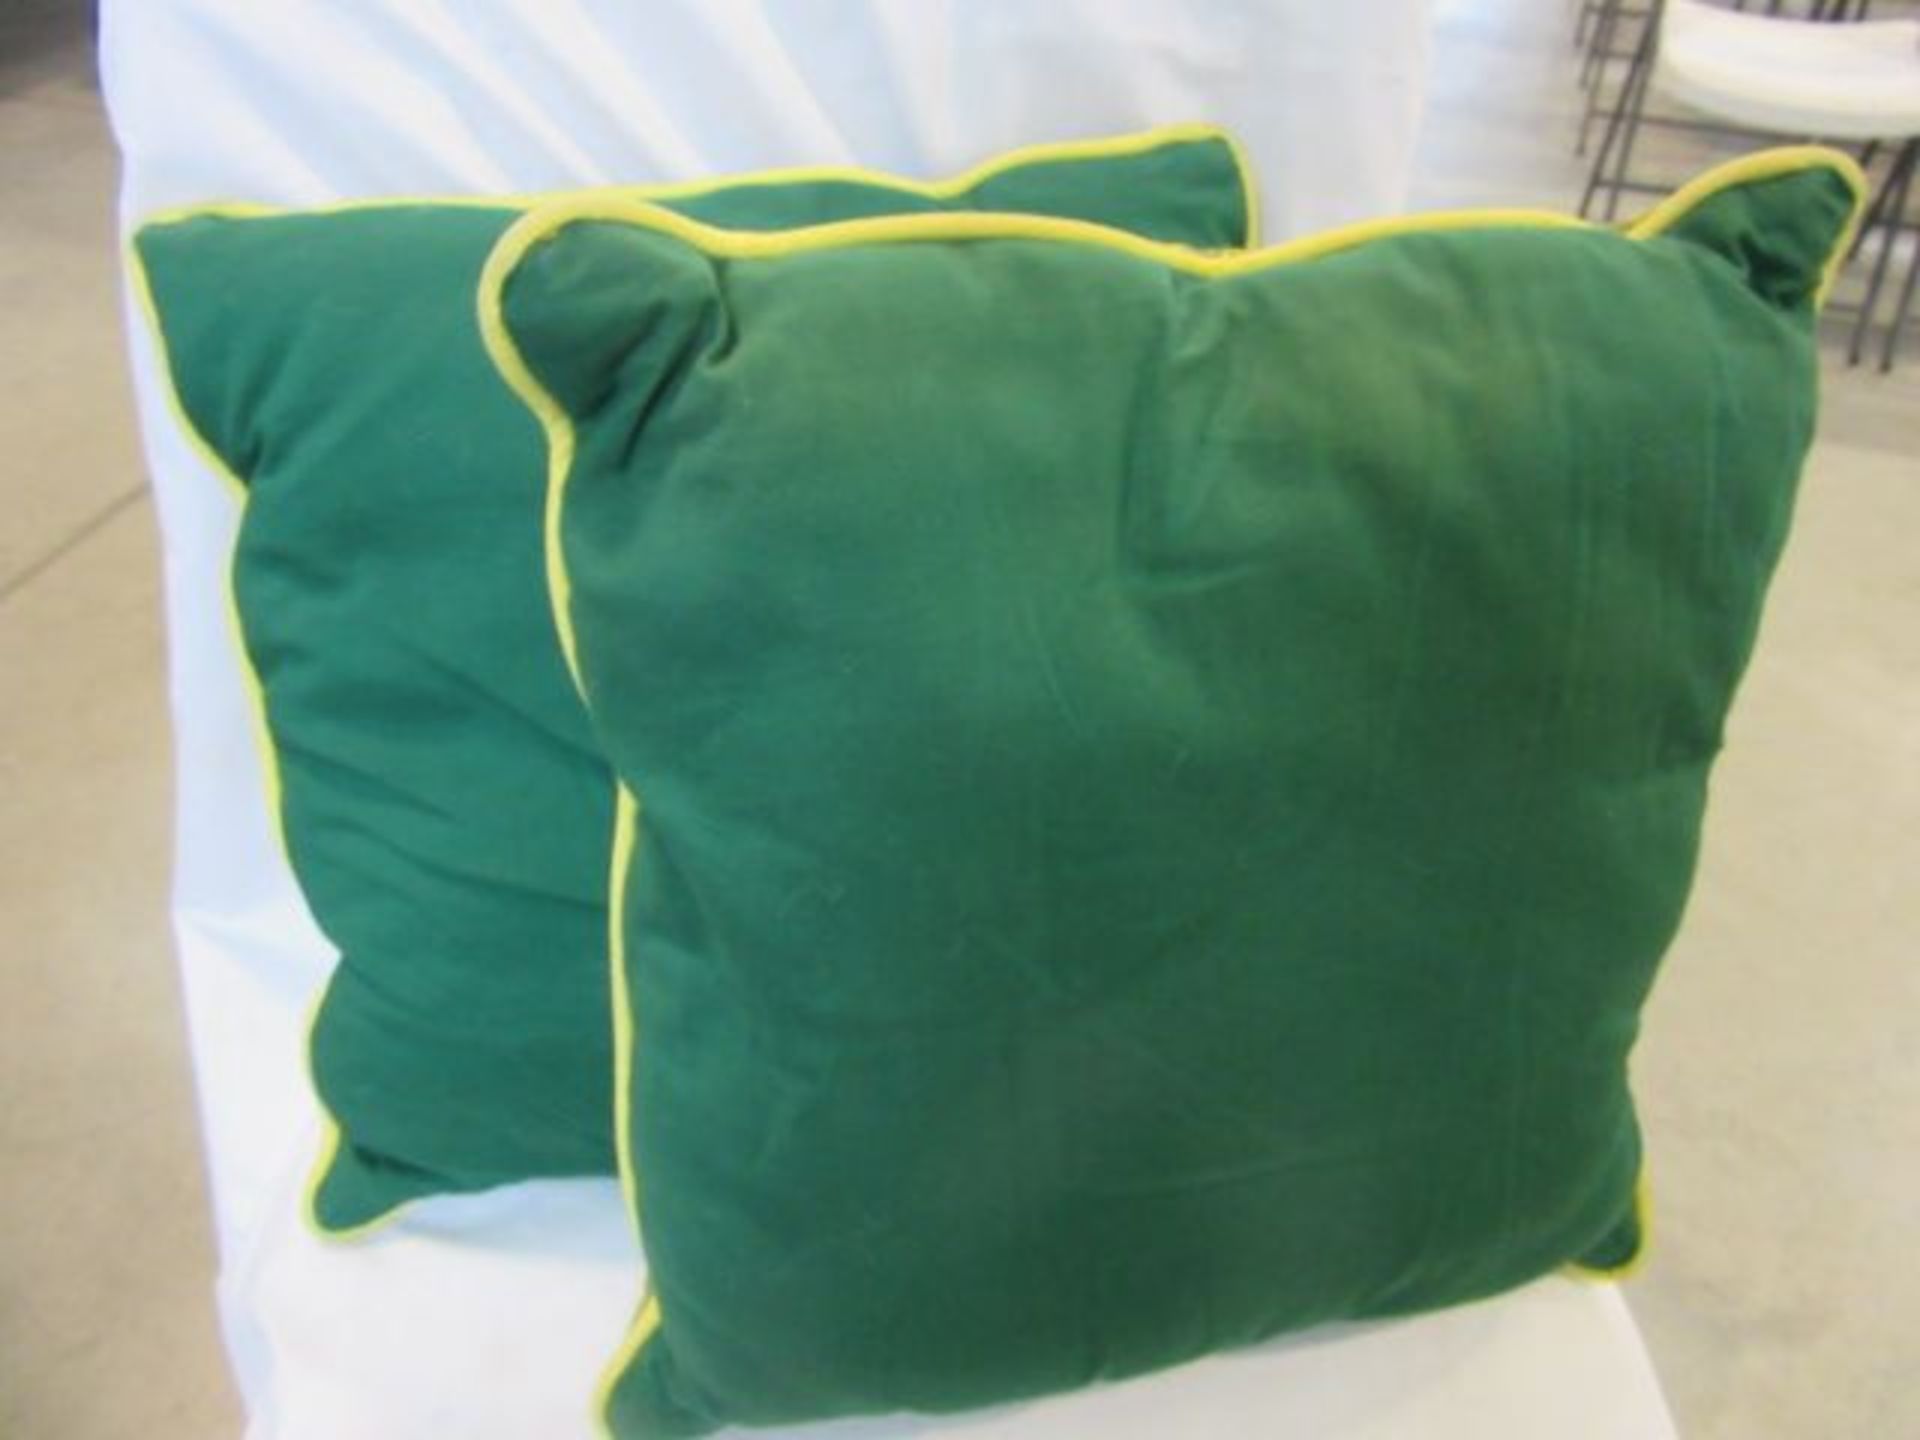 Two Pillow w/John Deere Tractor Designs - Image 2 of 2